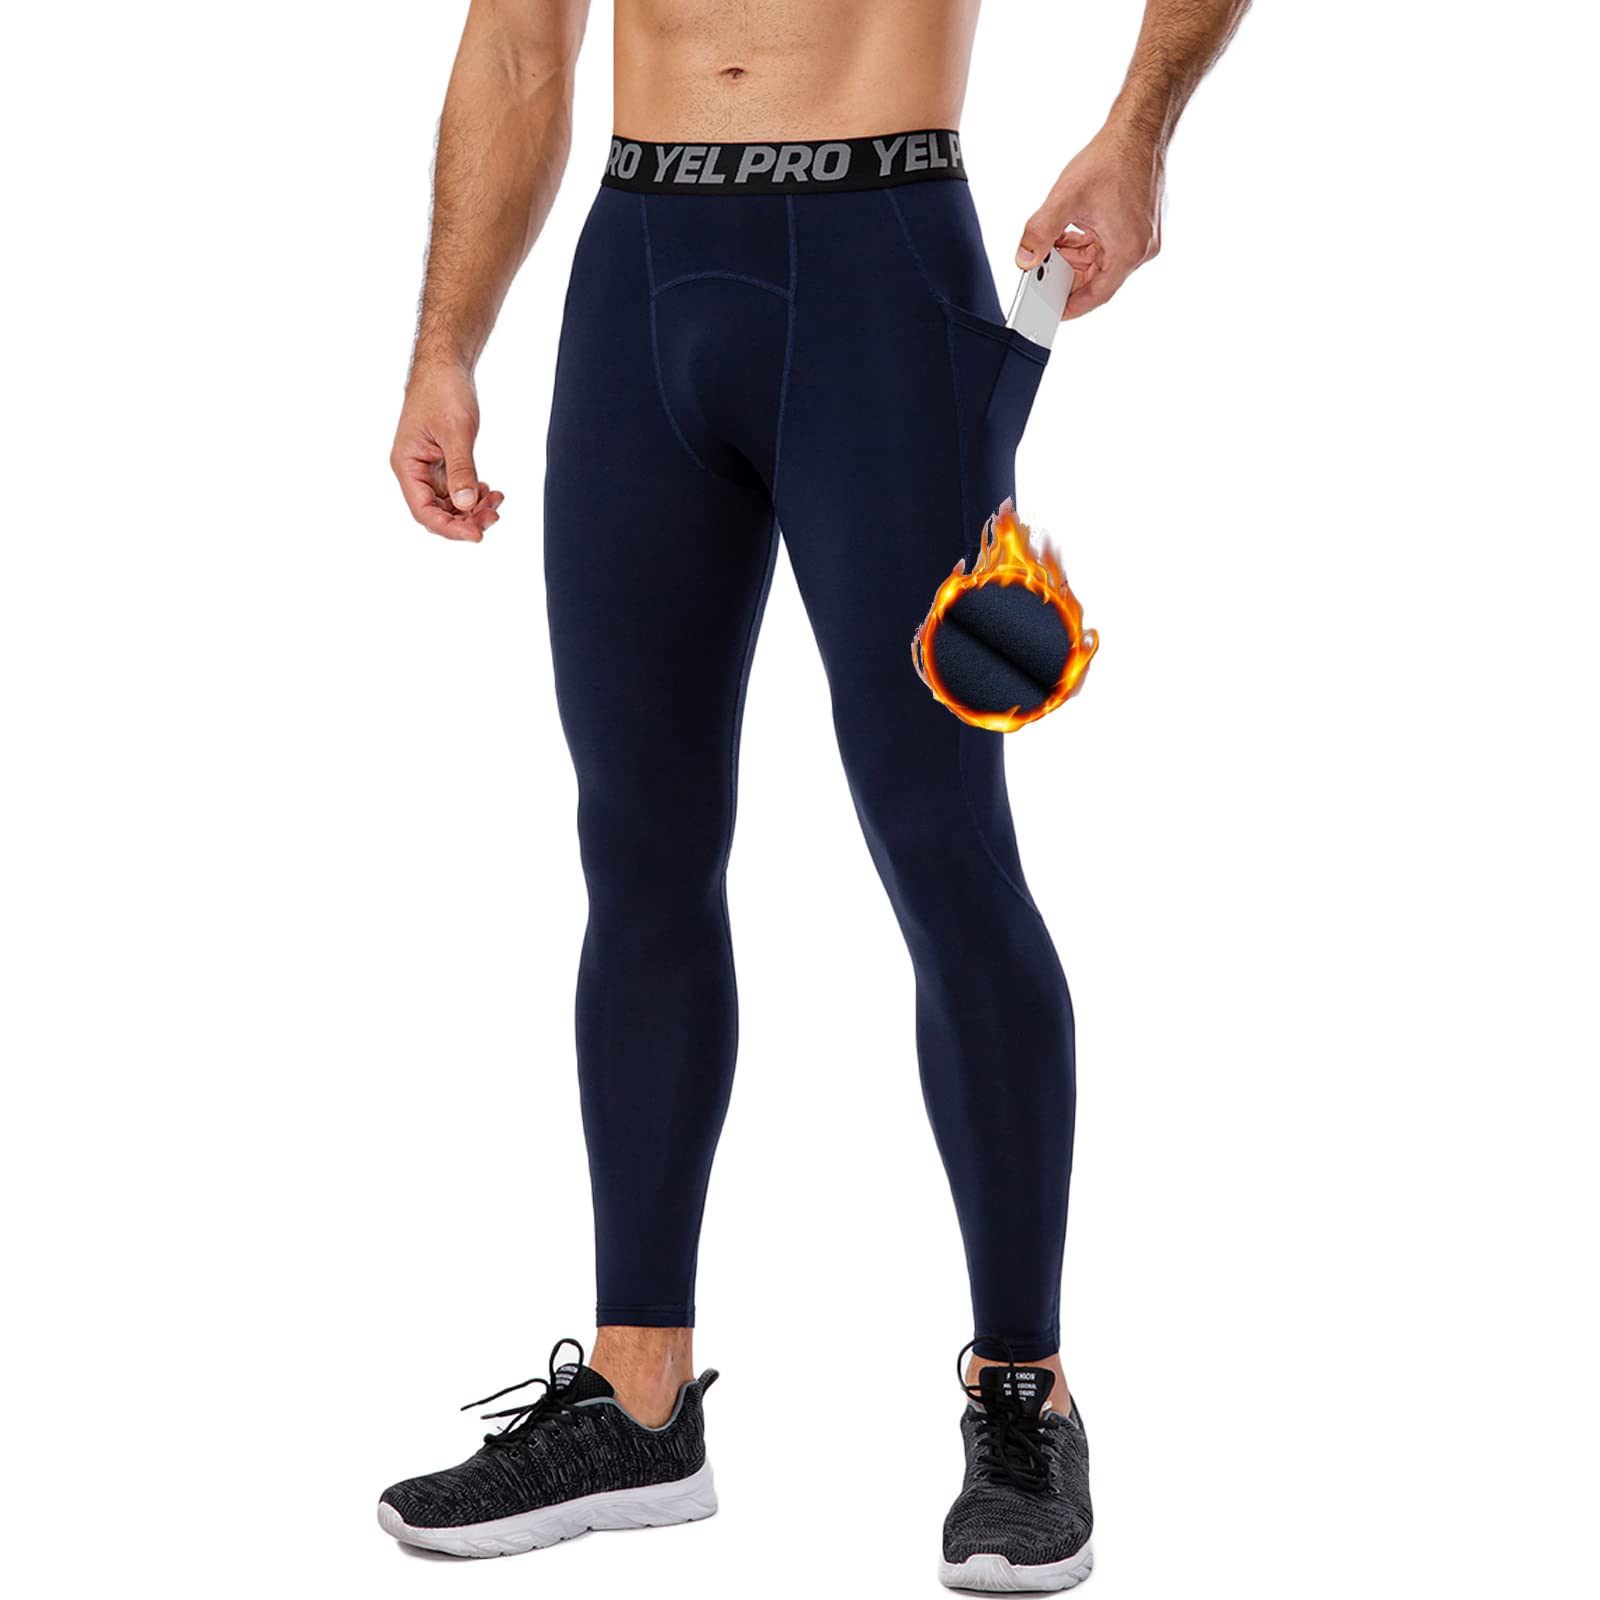 Men's Thermal Compression Pants Fleece Running Athletic Sports Tights  Cycling Resistant Leggings Cold Winter Biker Base Layer Bottoms 